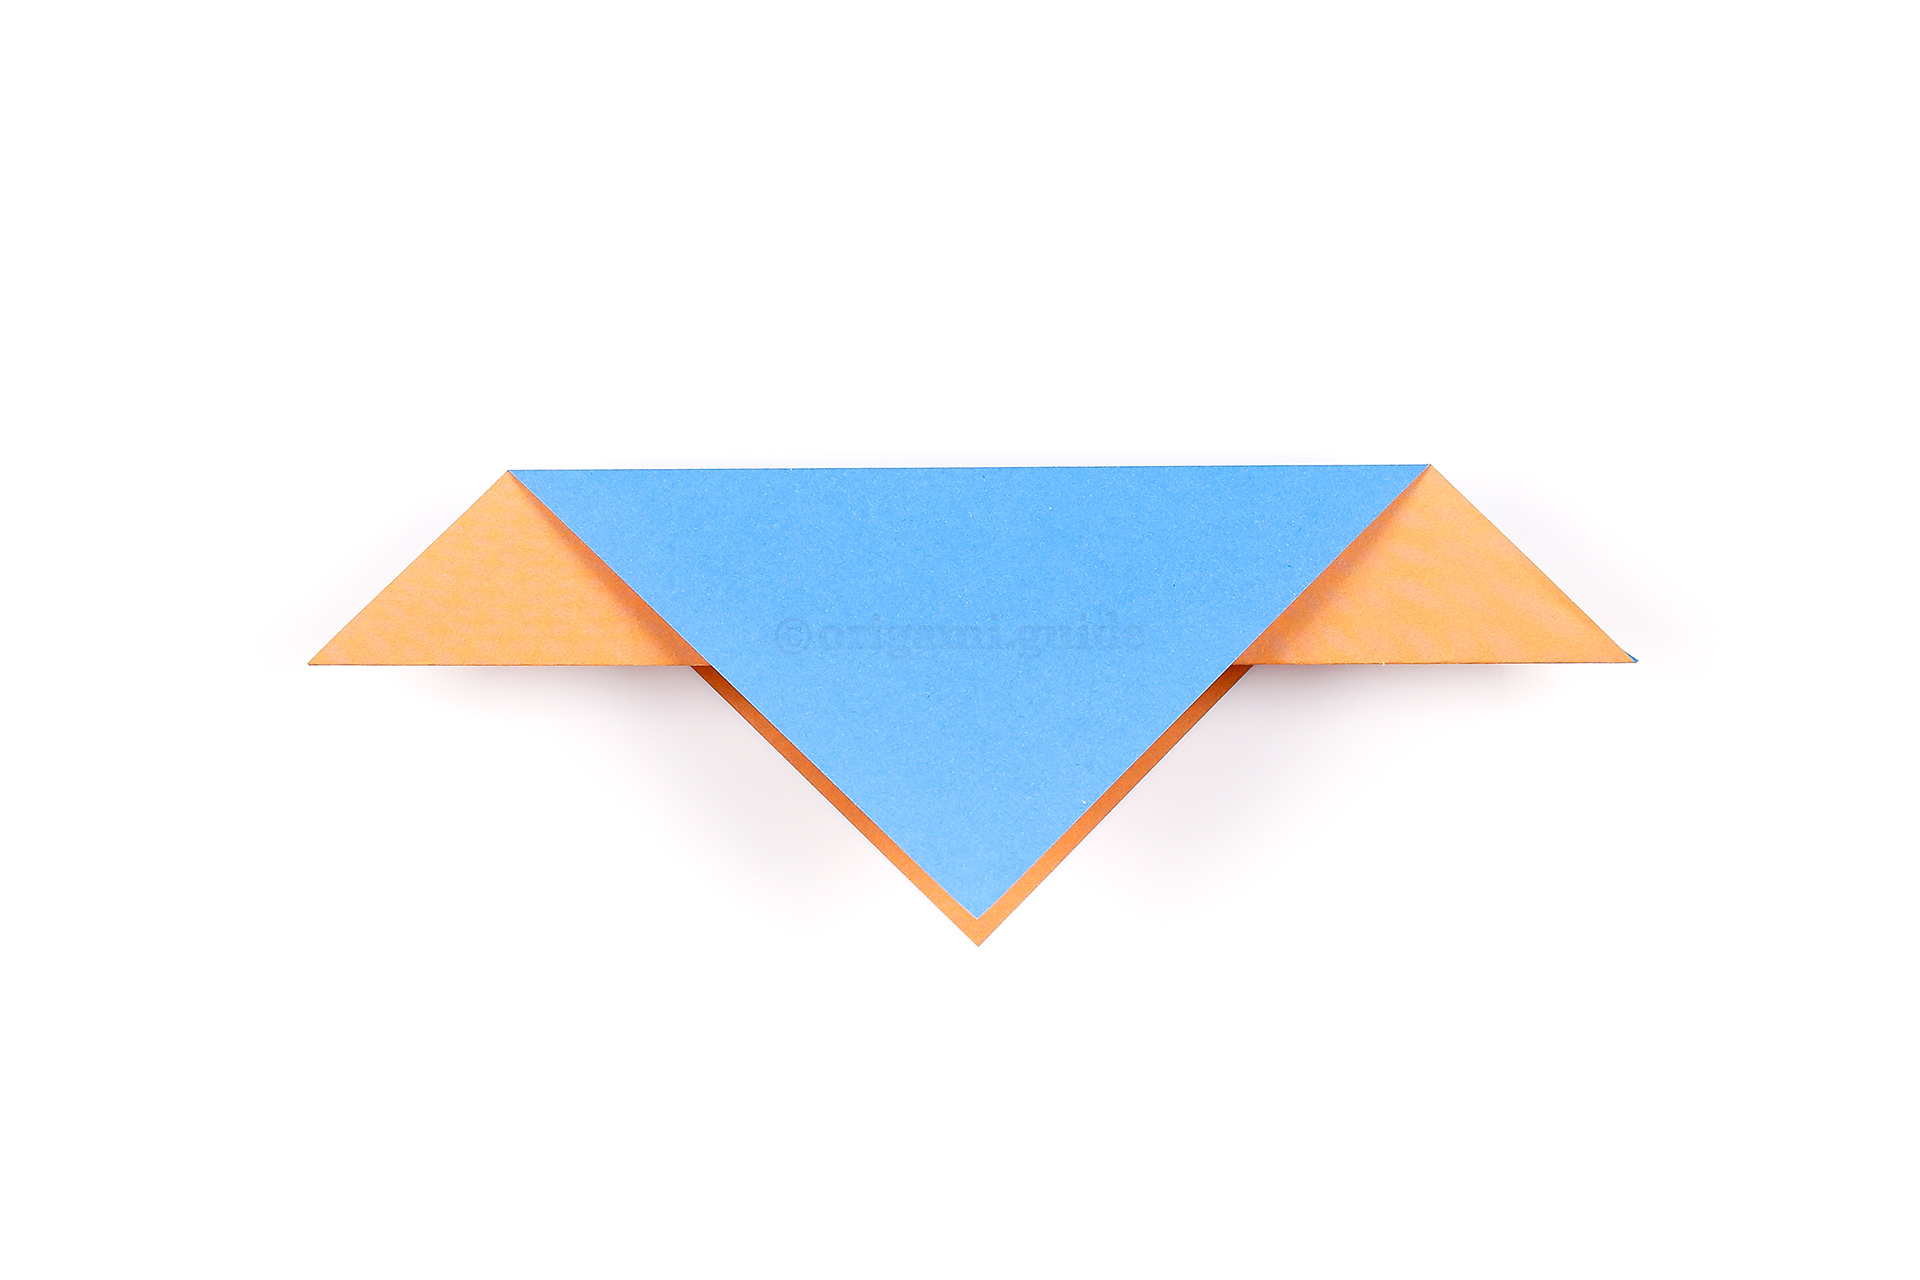 Fold the top triangular section down behind to match the front section.